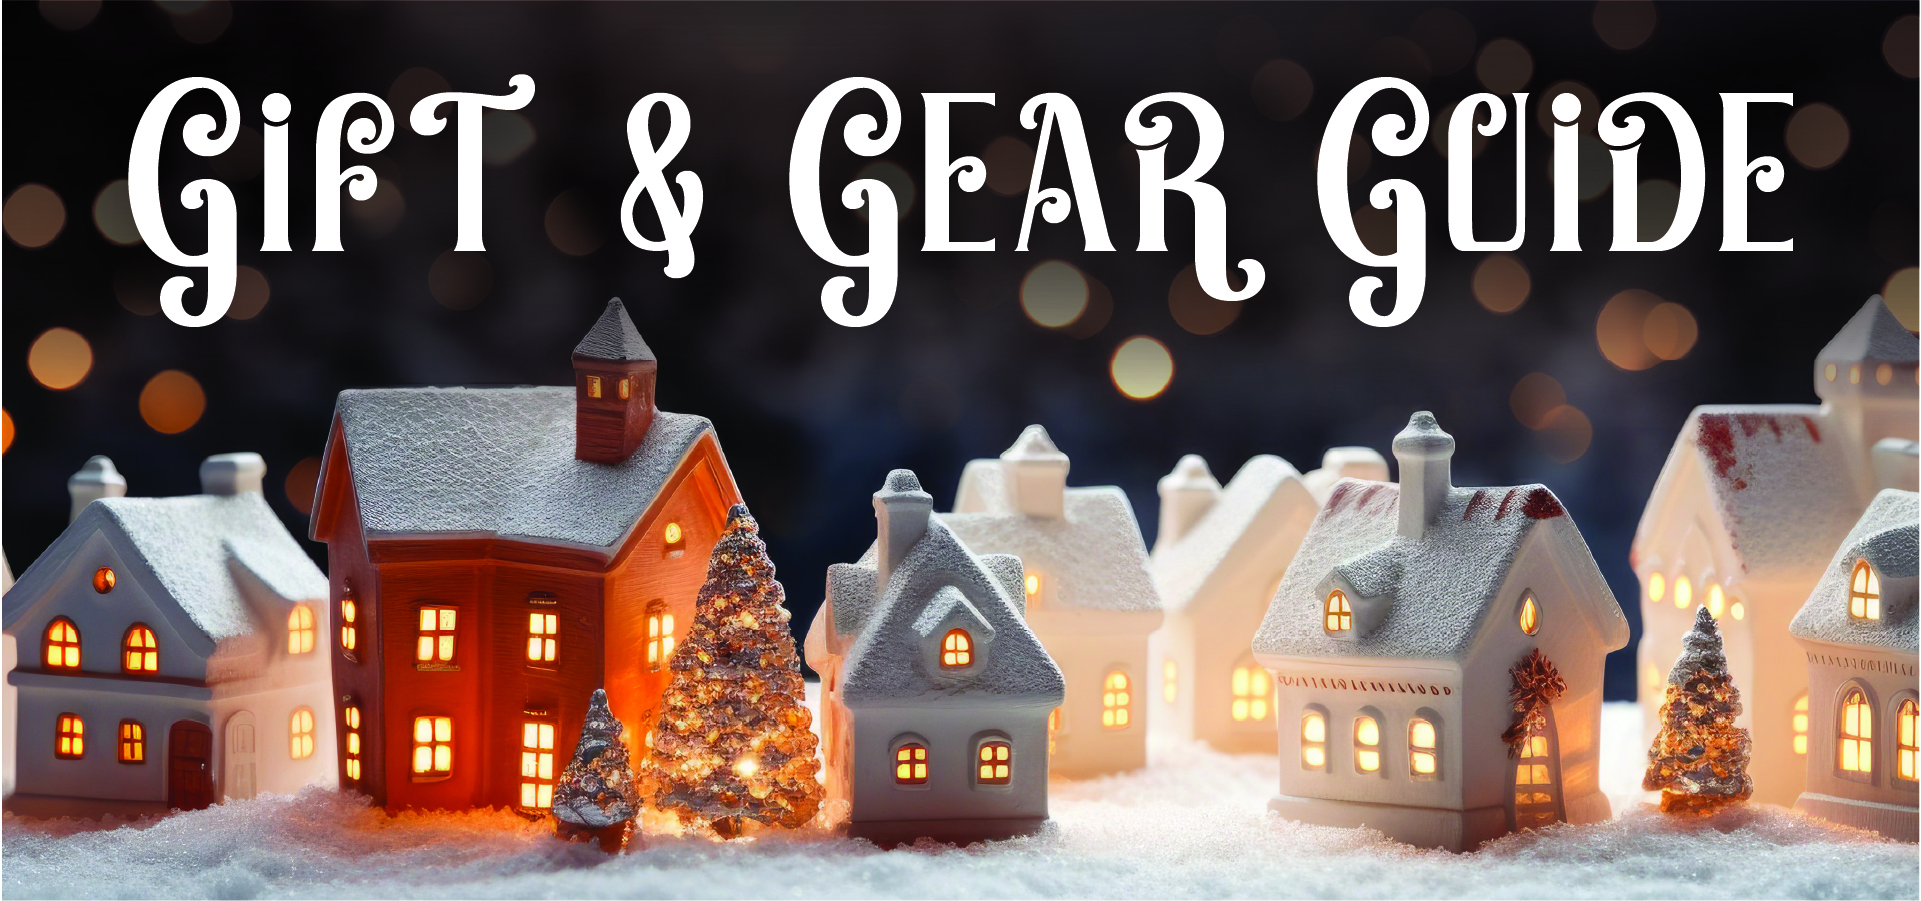 Gearx in Outdoor & Active Gifts average savings of 45% at Sierra - pg 6